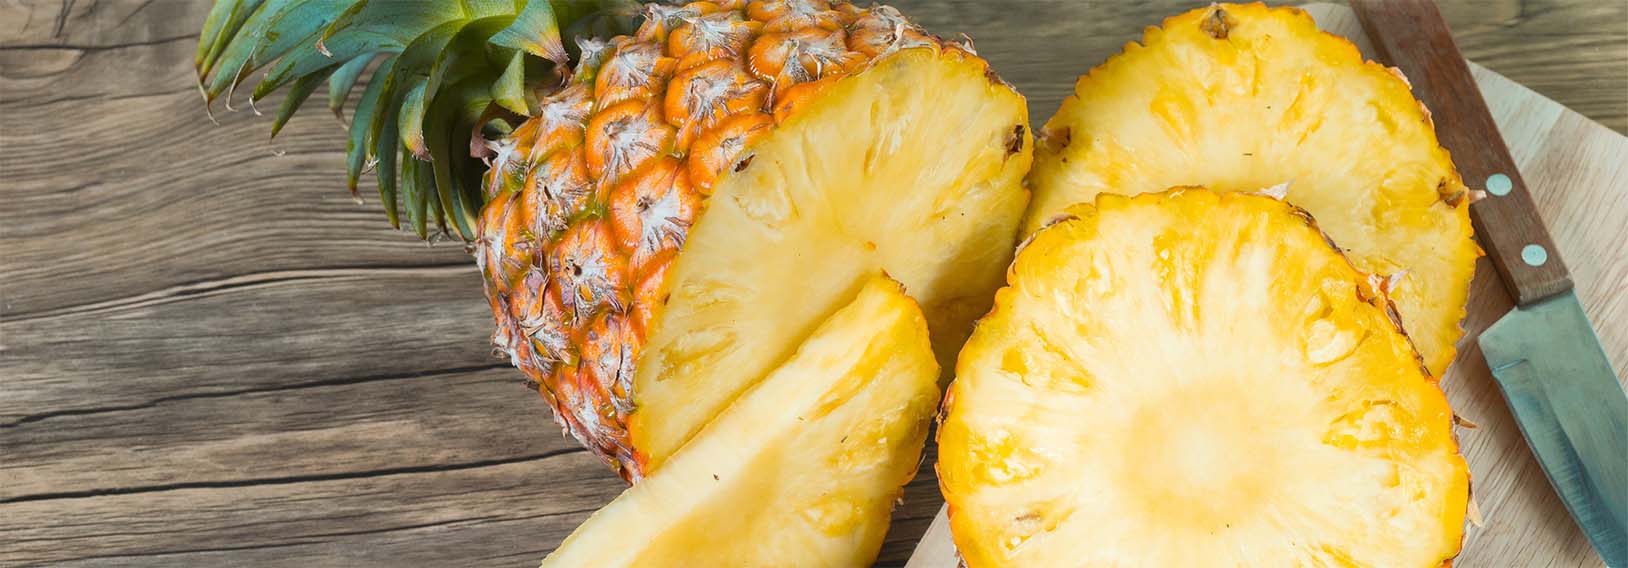 Nutrition facts and health benefits of Pineapple